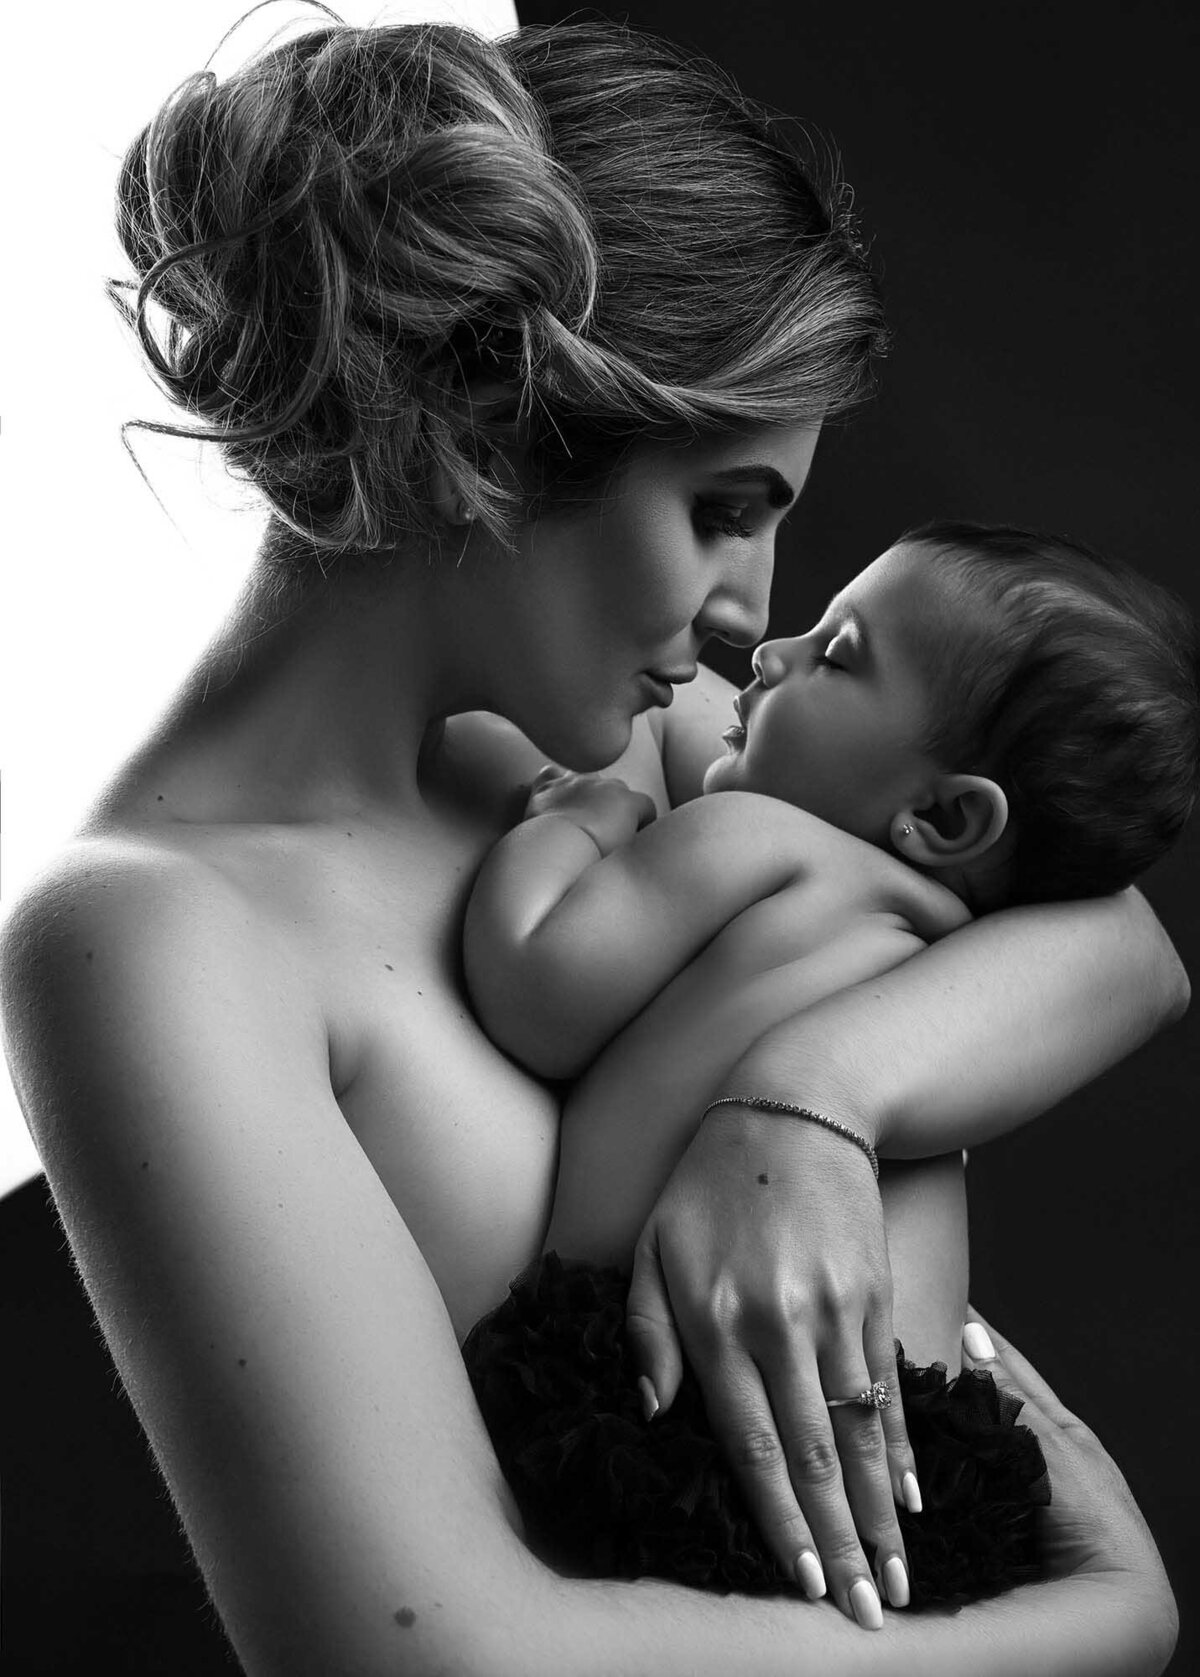 w0 - mommy and me by lisset galeyev photography